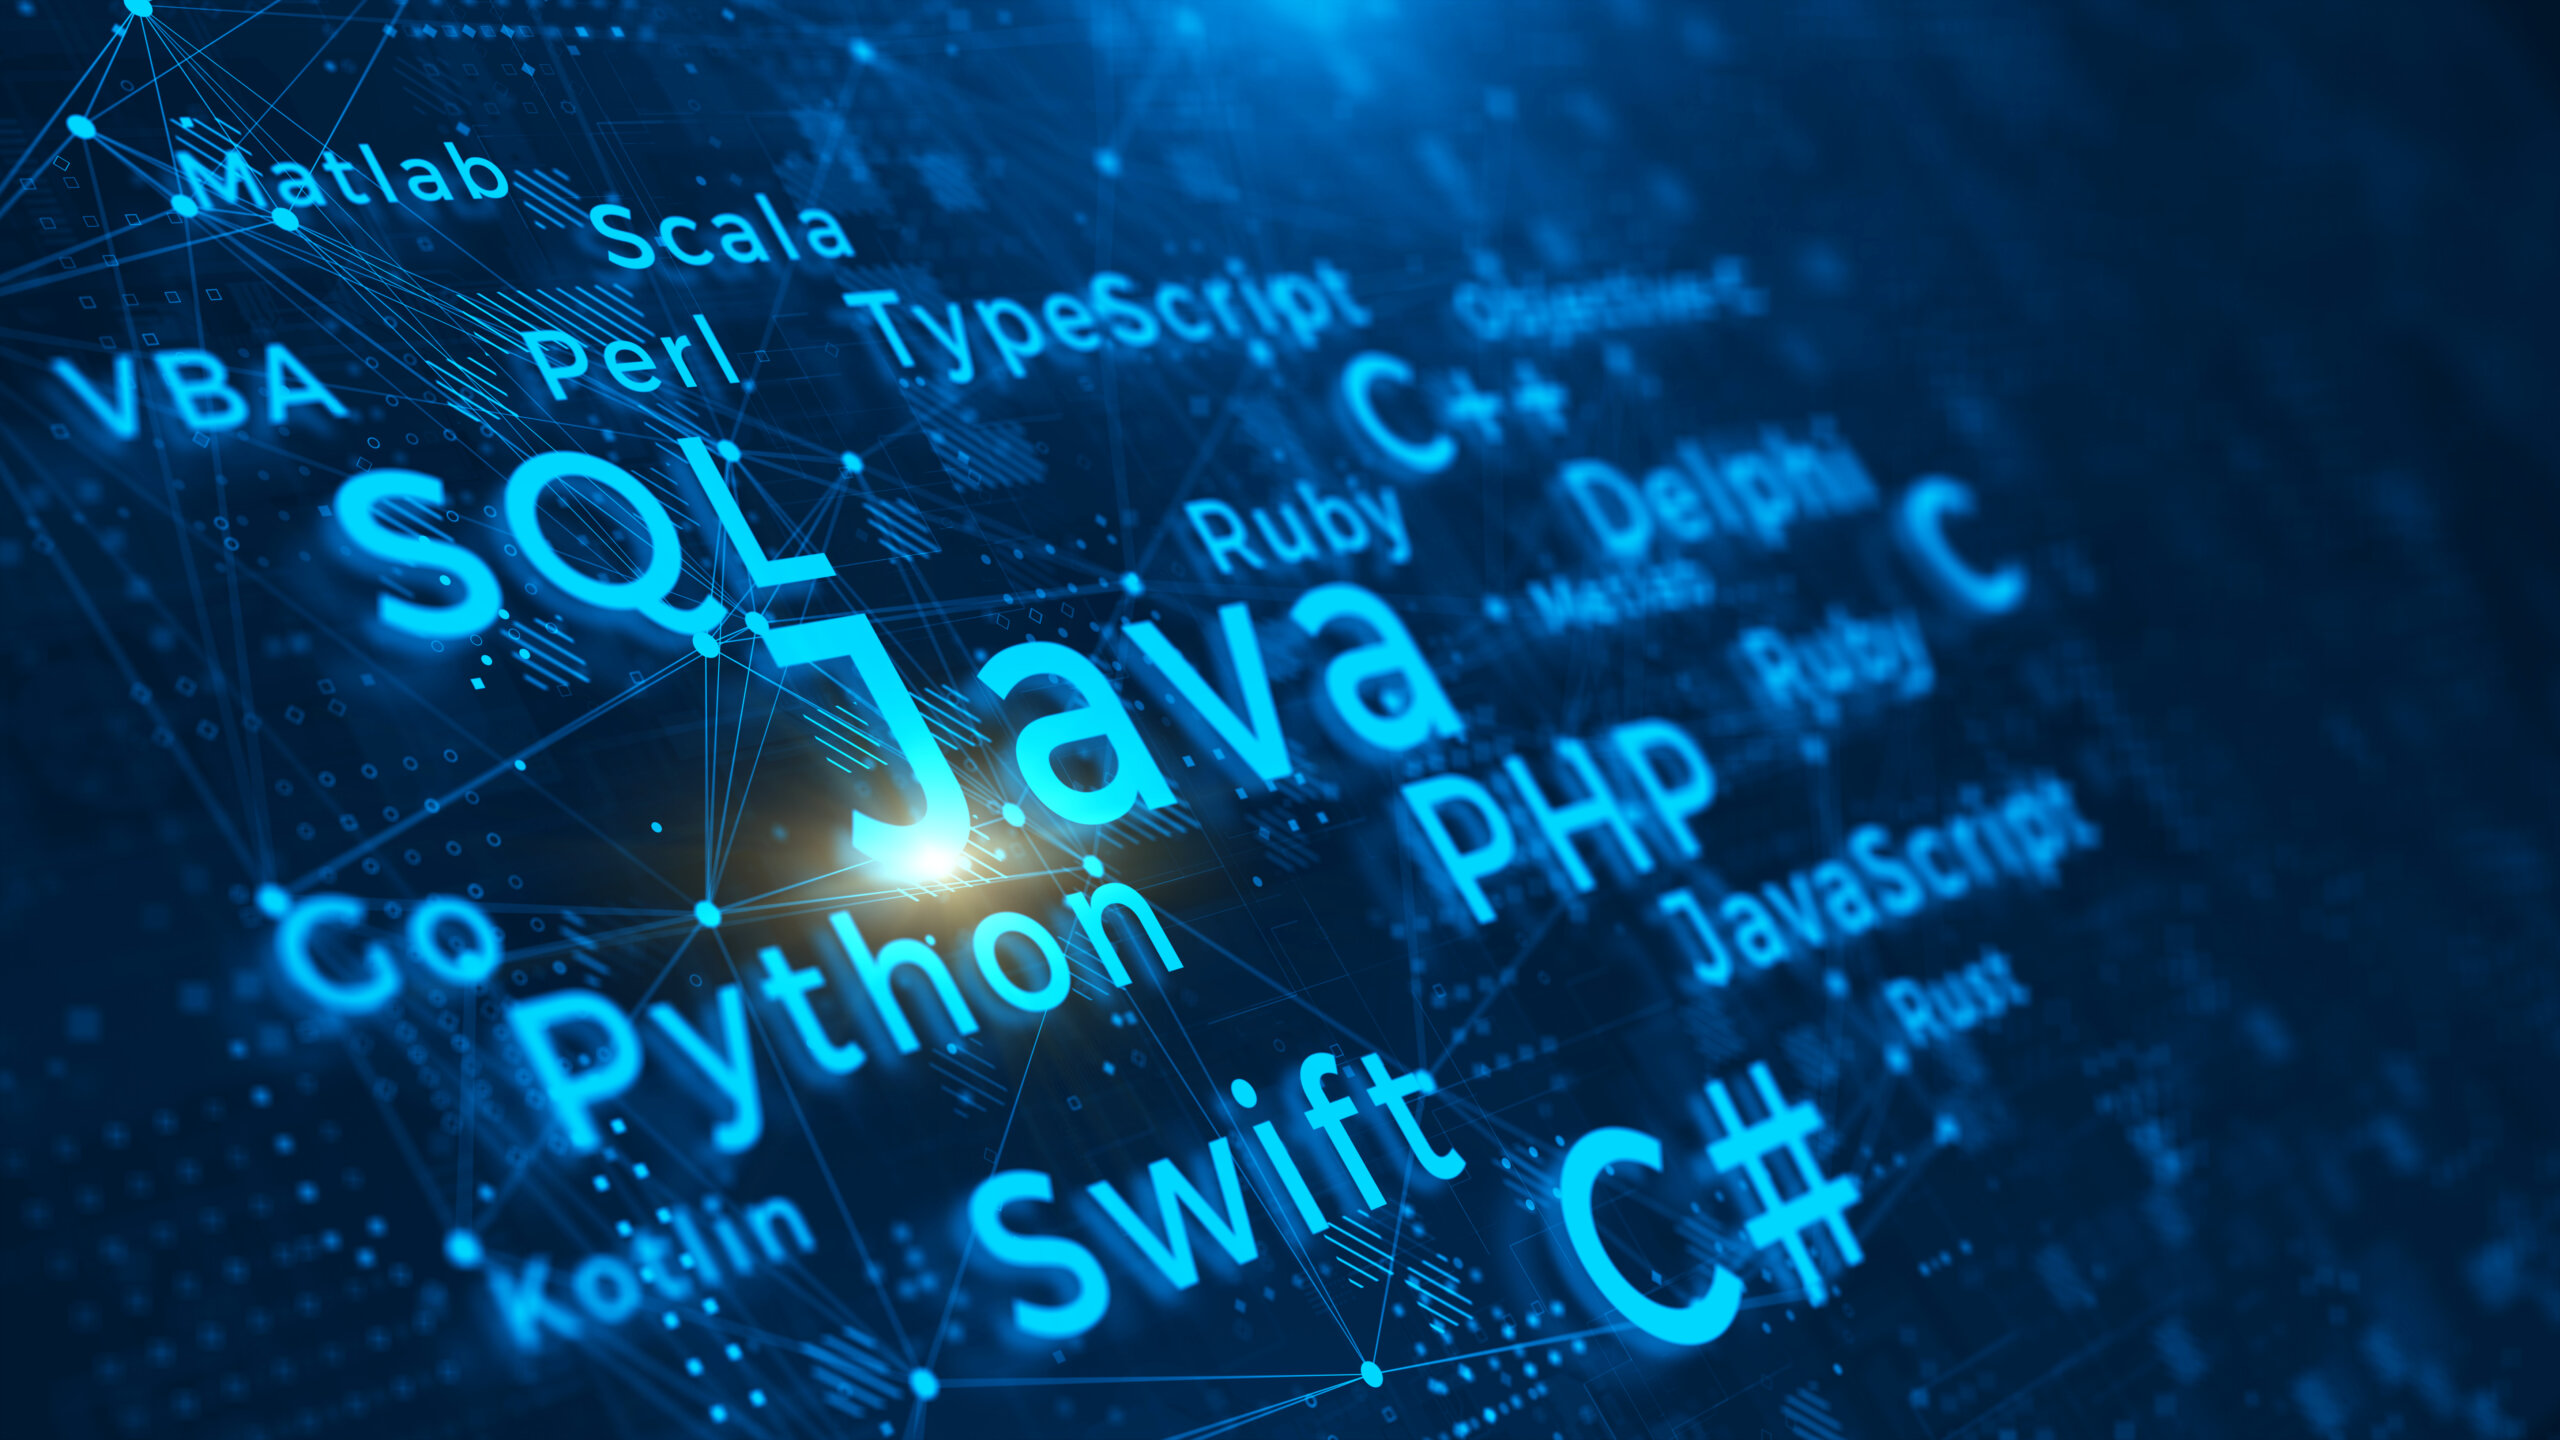 The use of programming languages varies depending on the context and purpose.